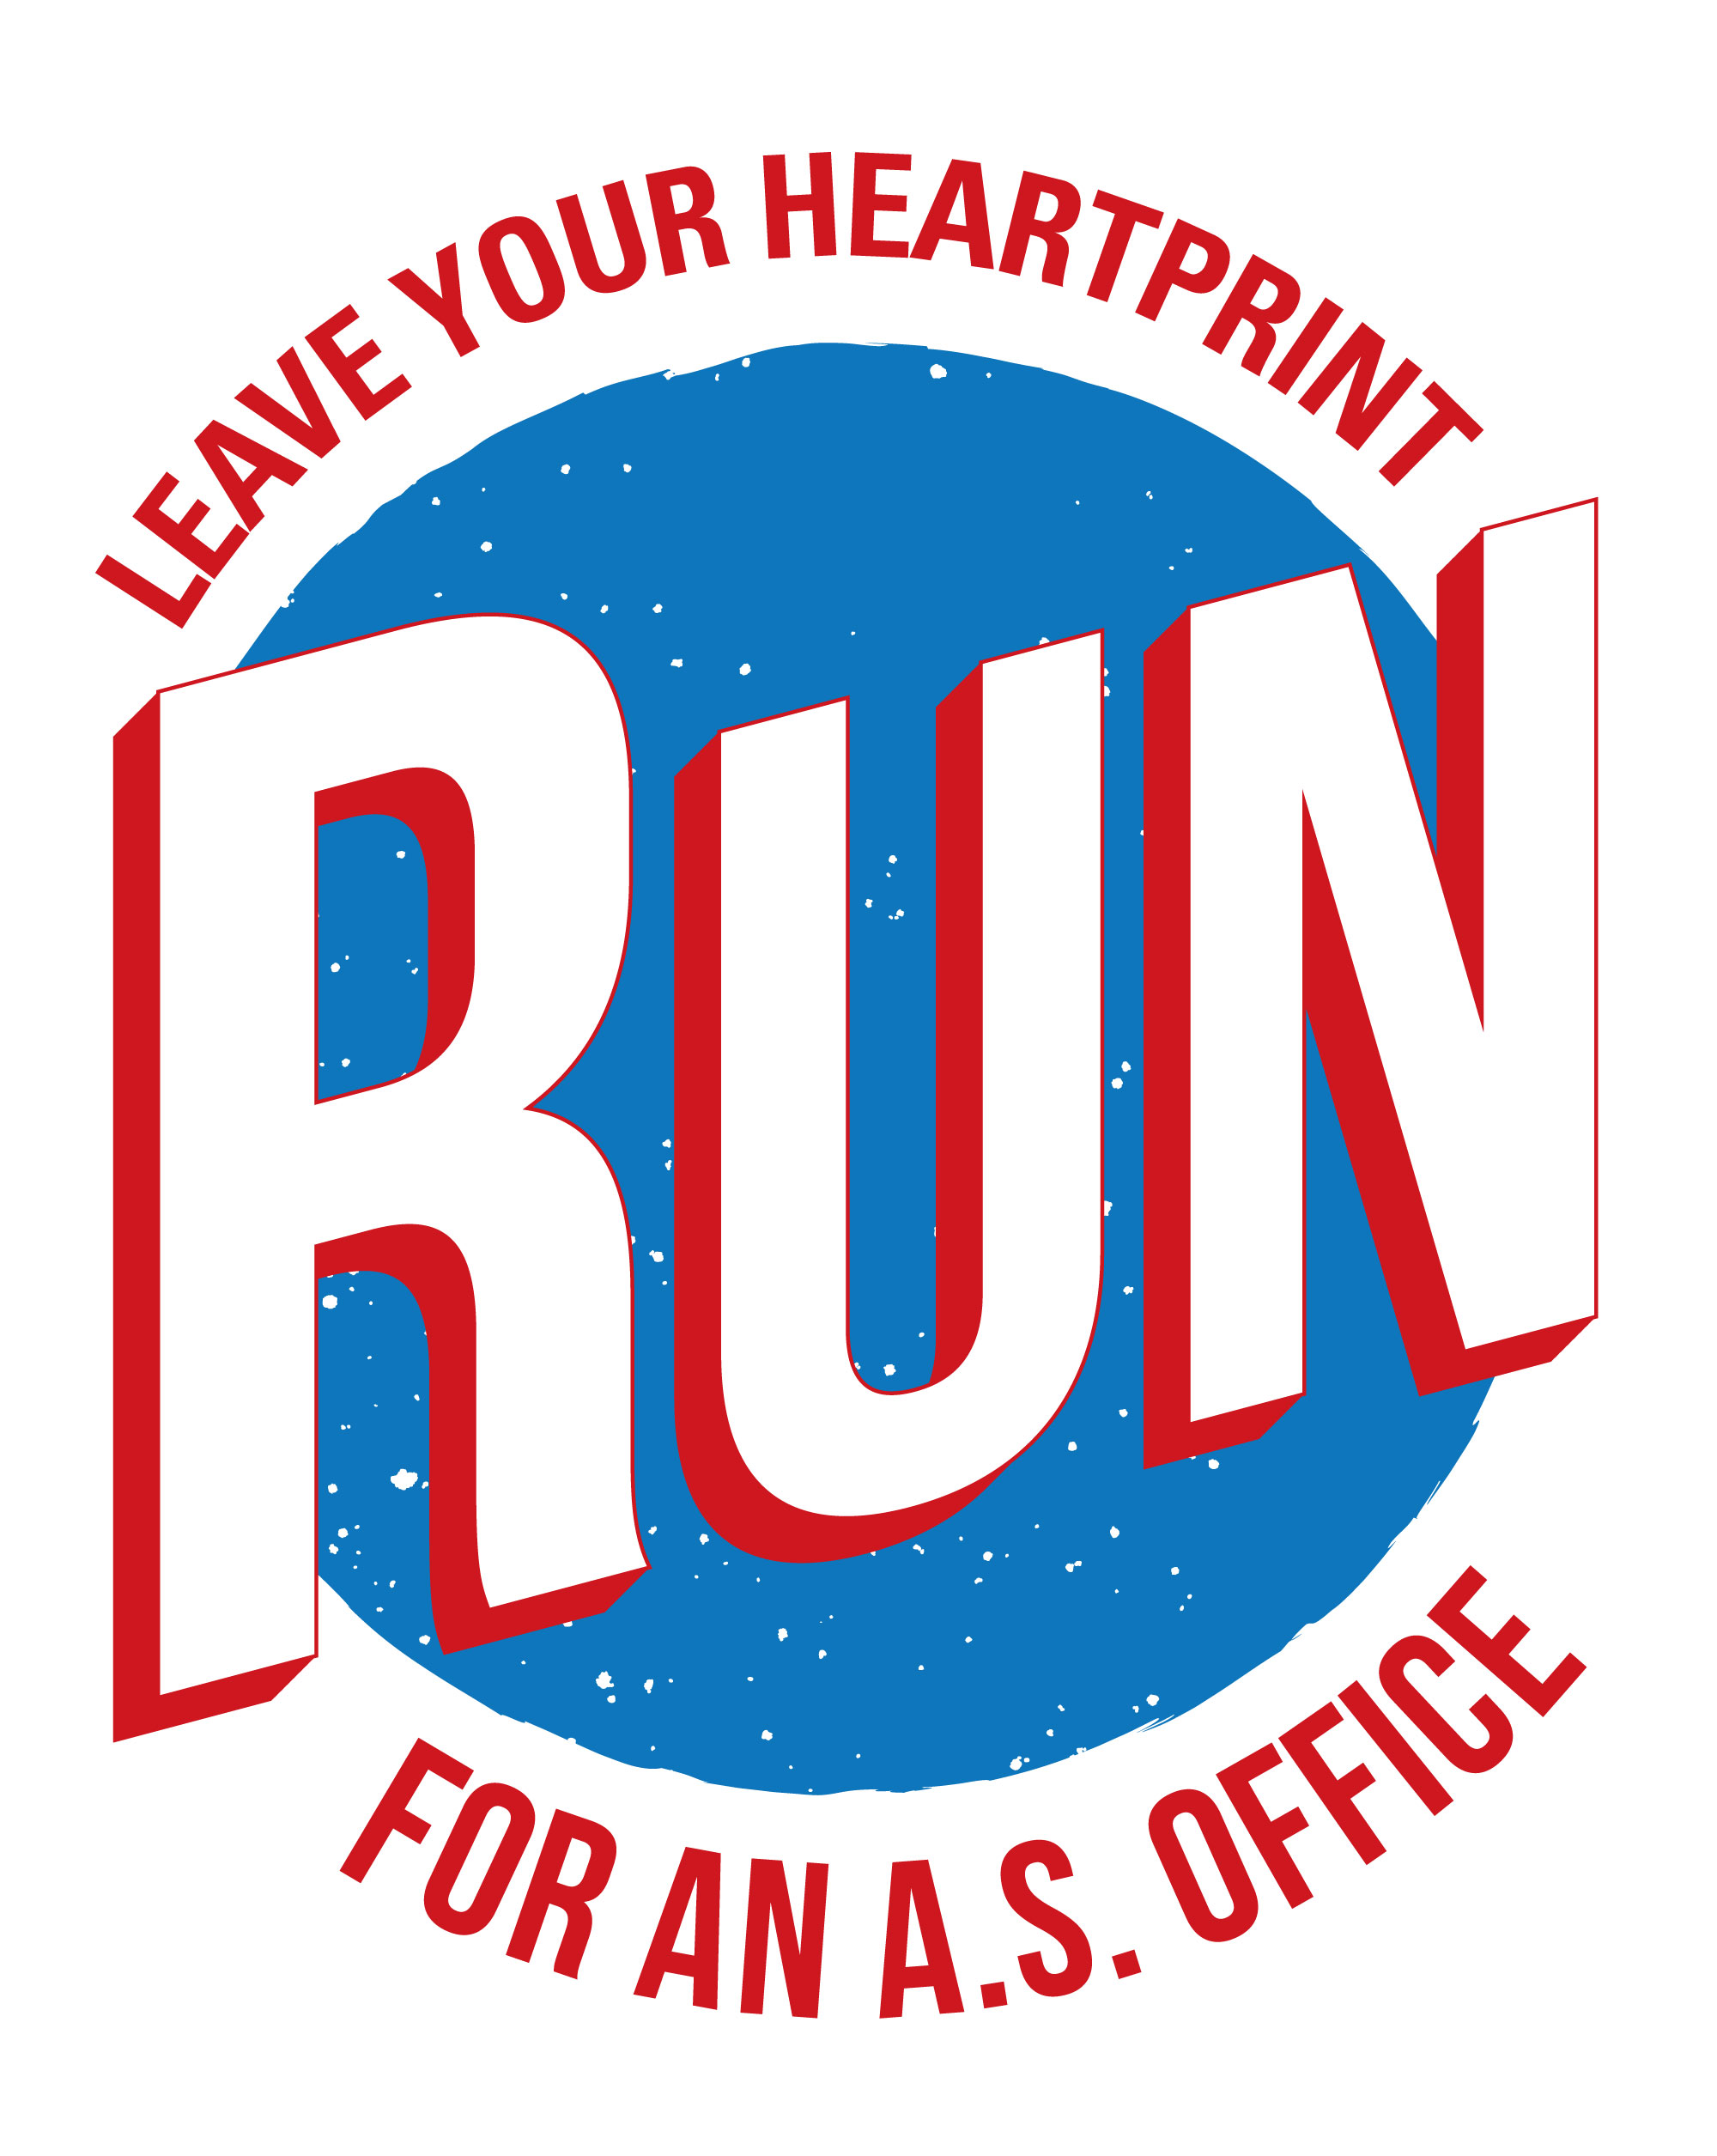 Leave your heartprint. Run for an A.S. Office